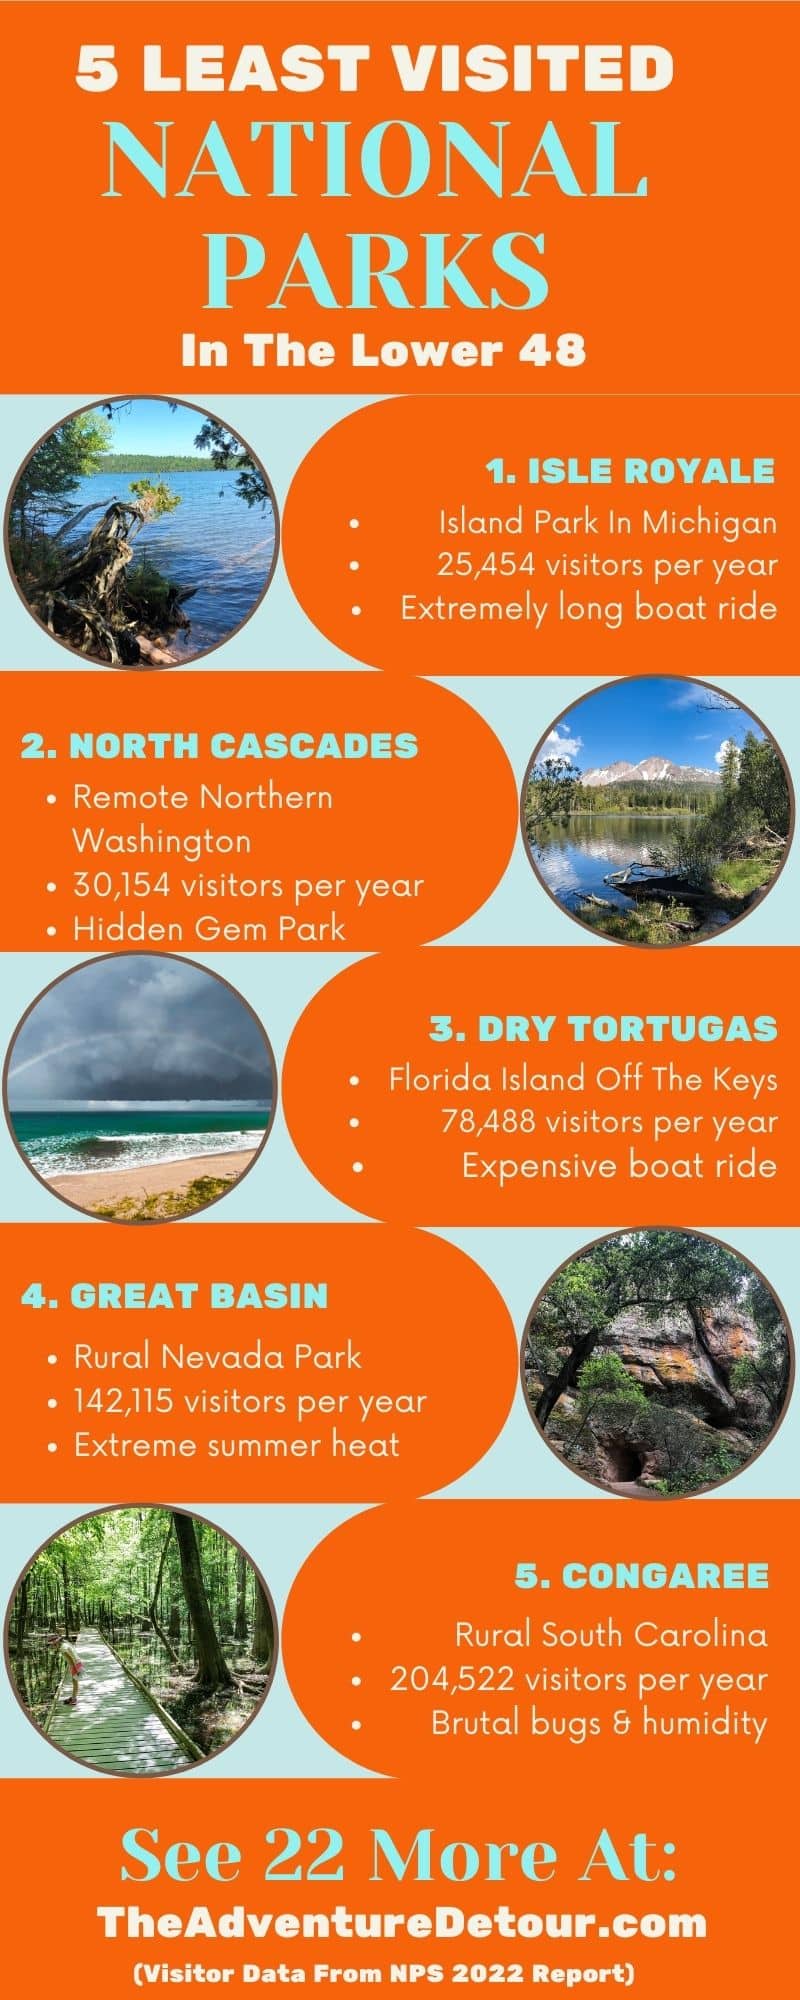 Infographic showing 5 least-visited national parks in the lower 48